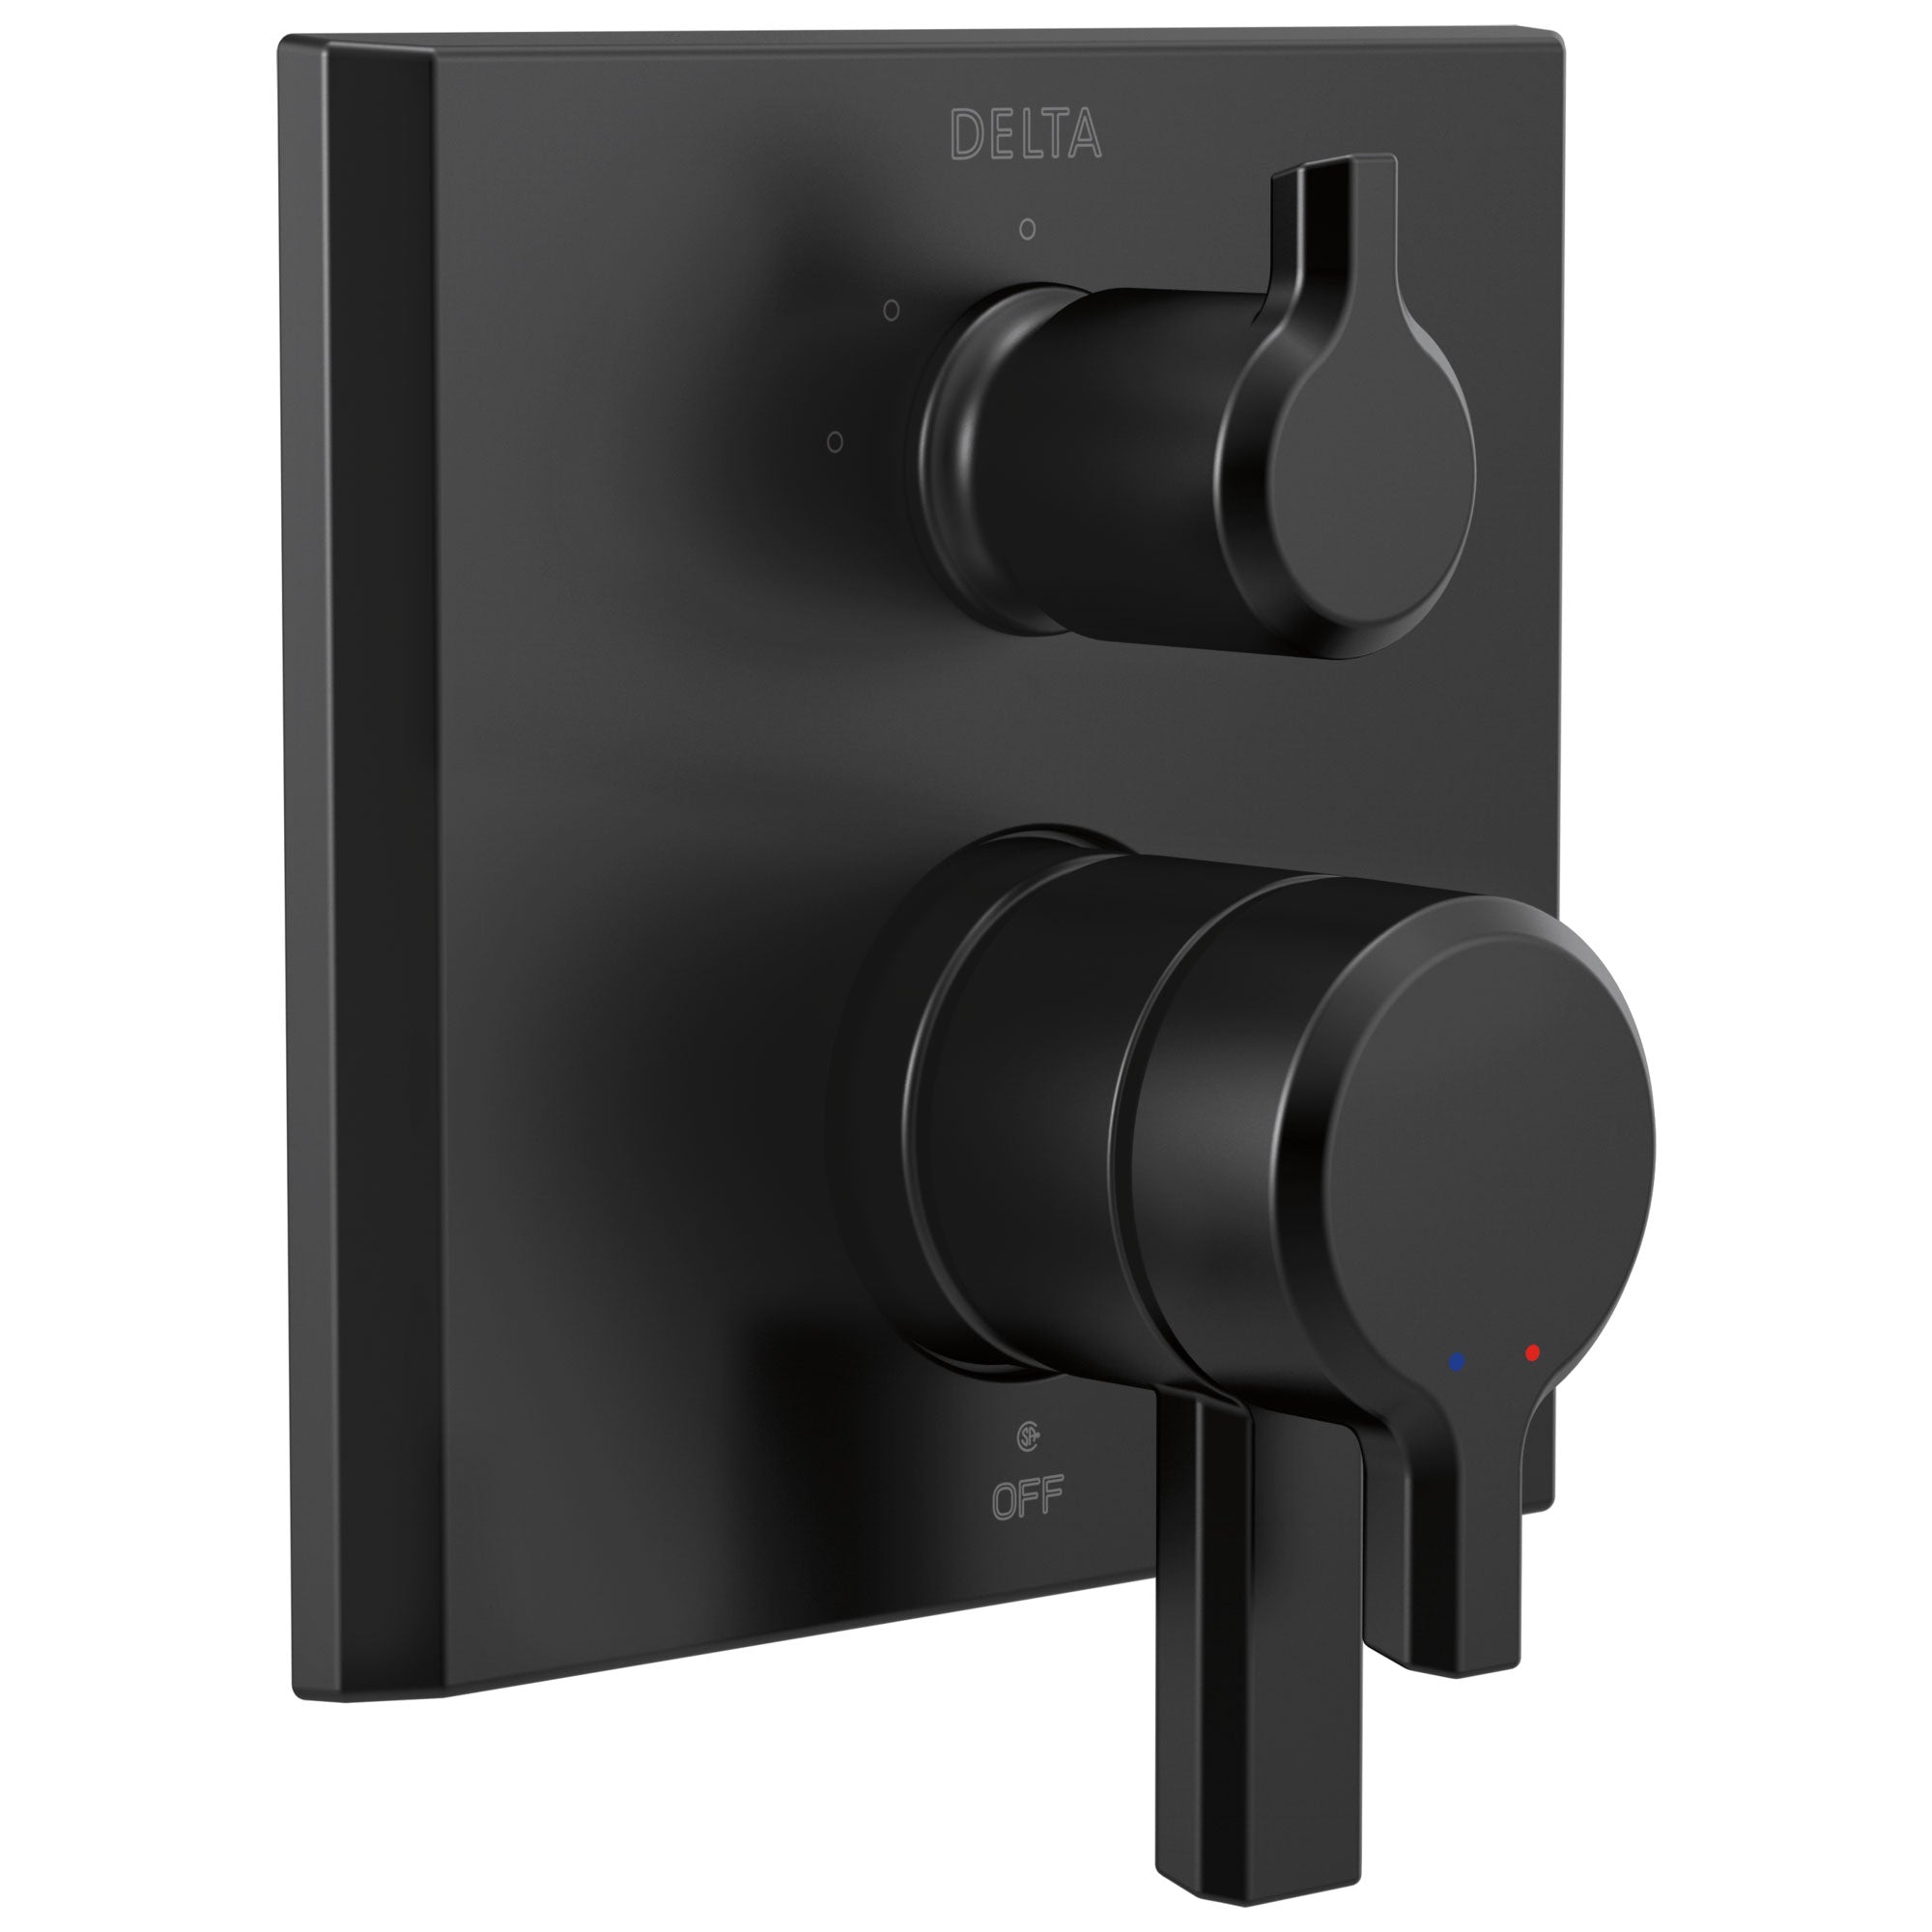 Delta Pivotal Matte Black Finish Monitor 17 Series Shower System Control with 3-Setting Diverter Includes Rough-in Valve and Handles D3136V